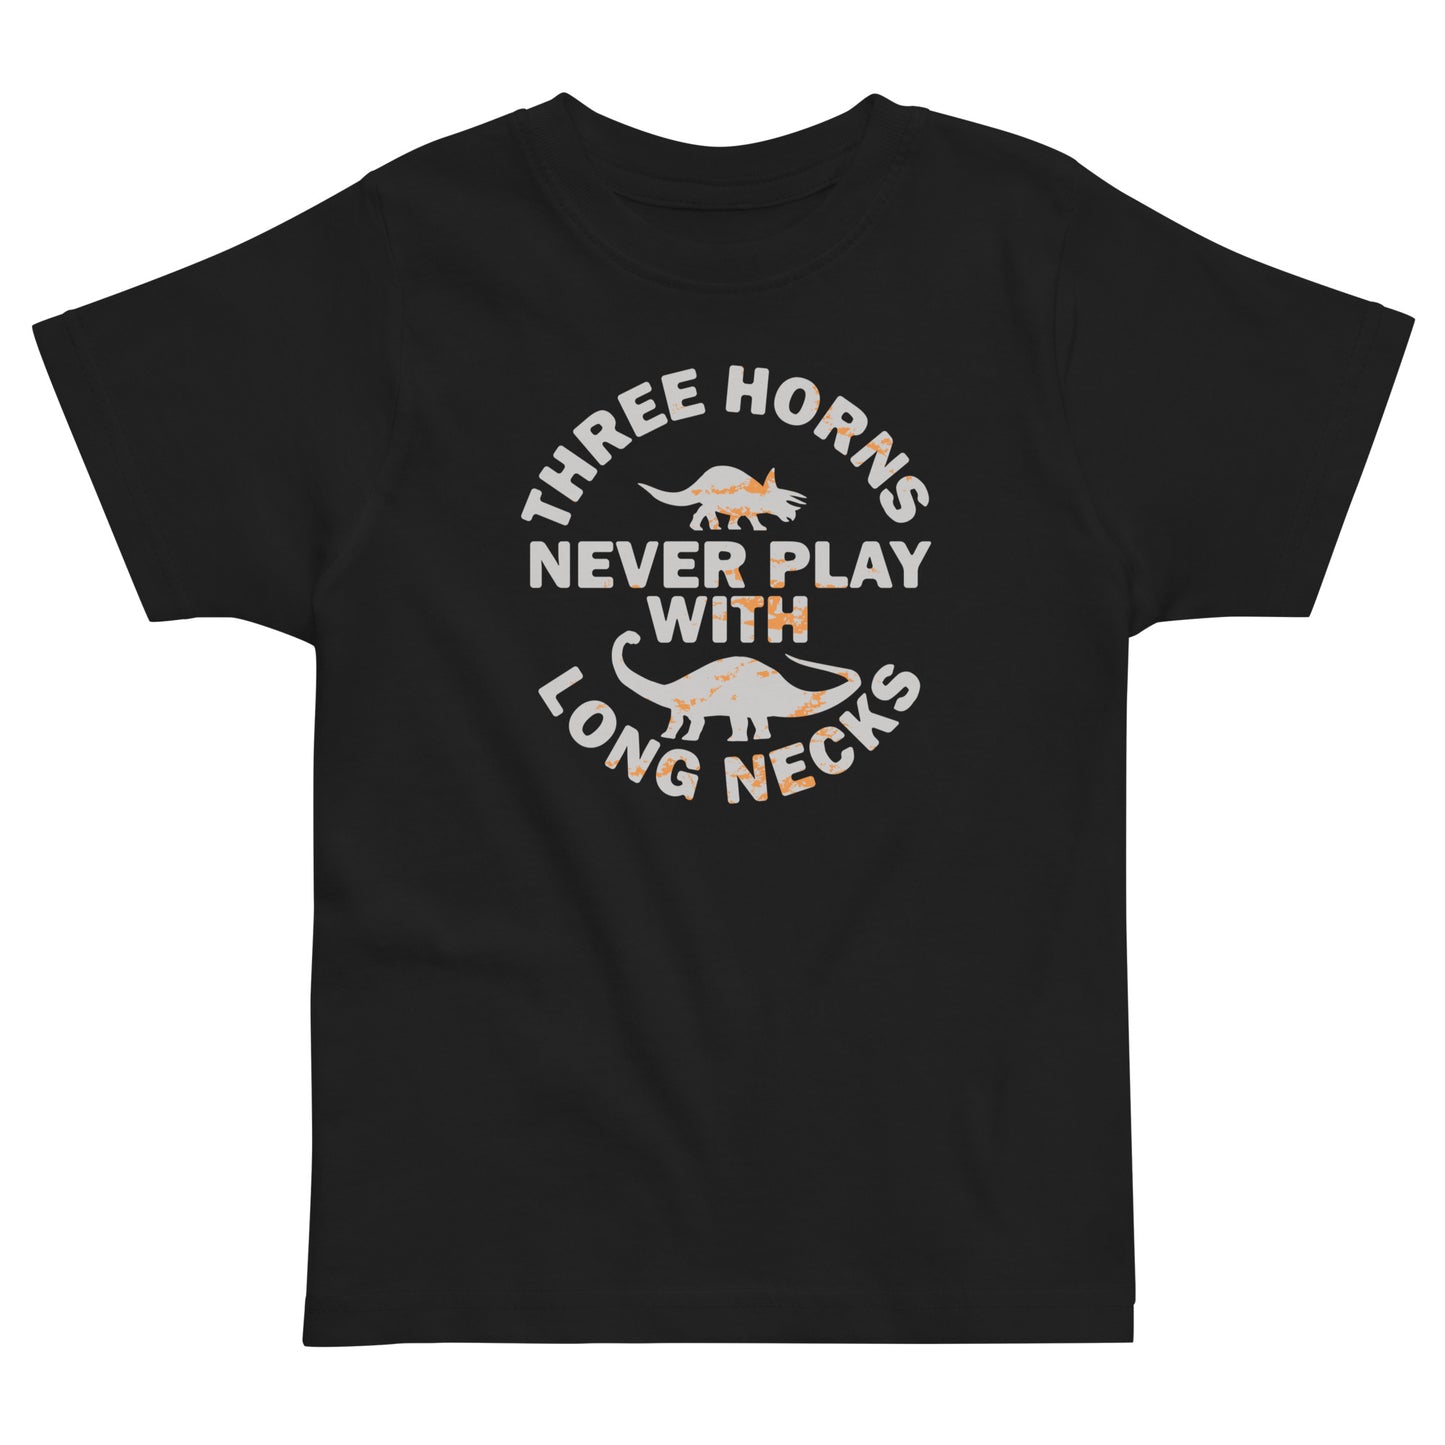 Three Horns Never Play With Long Necks Kid's Toddler Tee